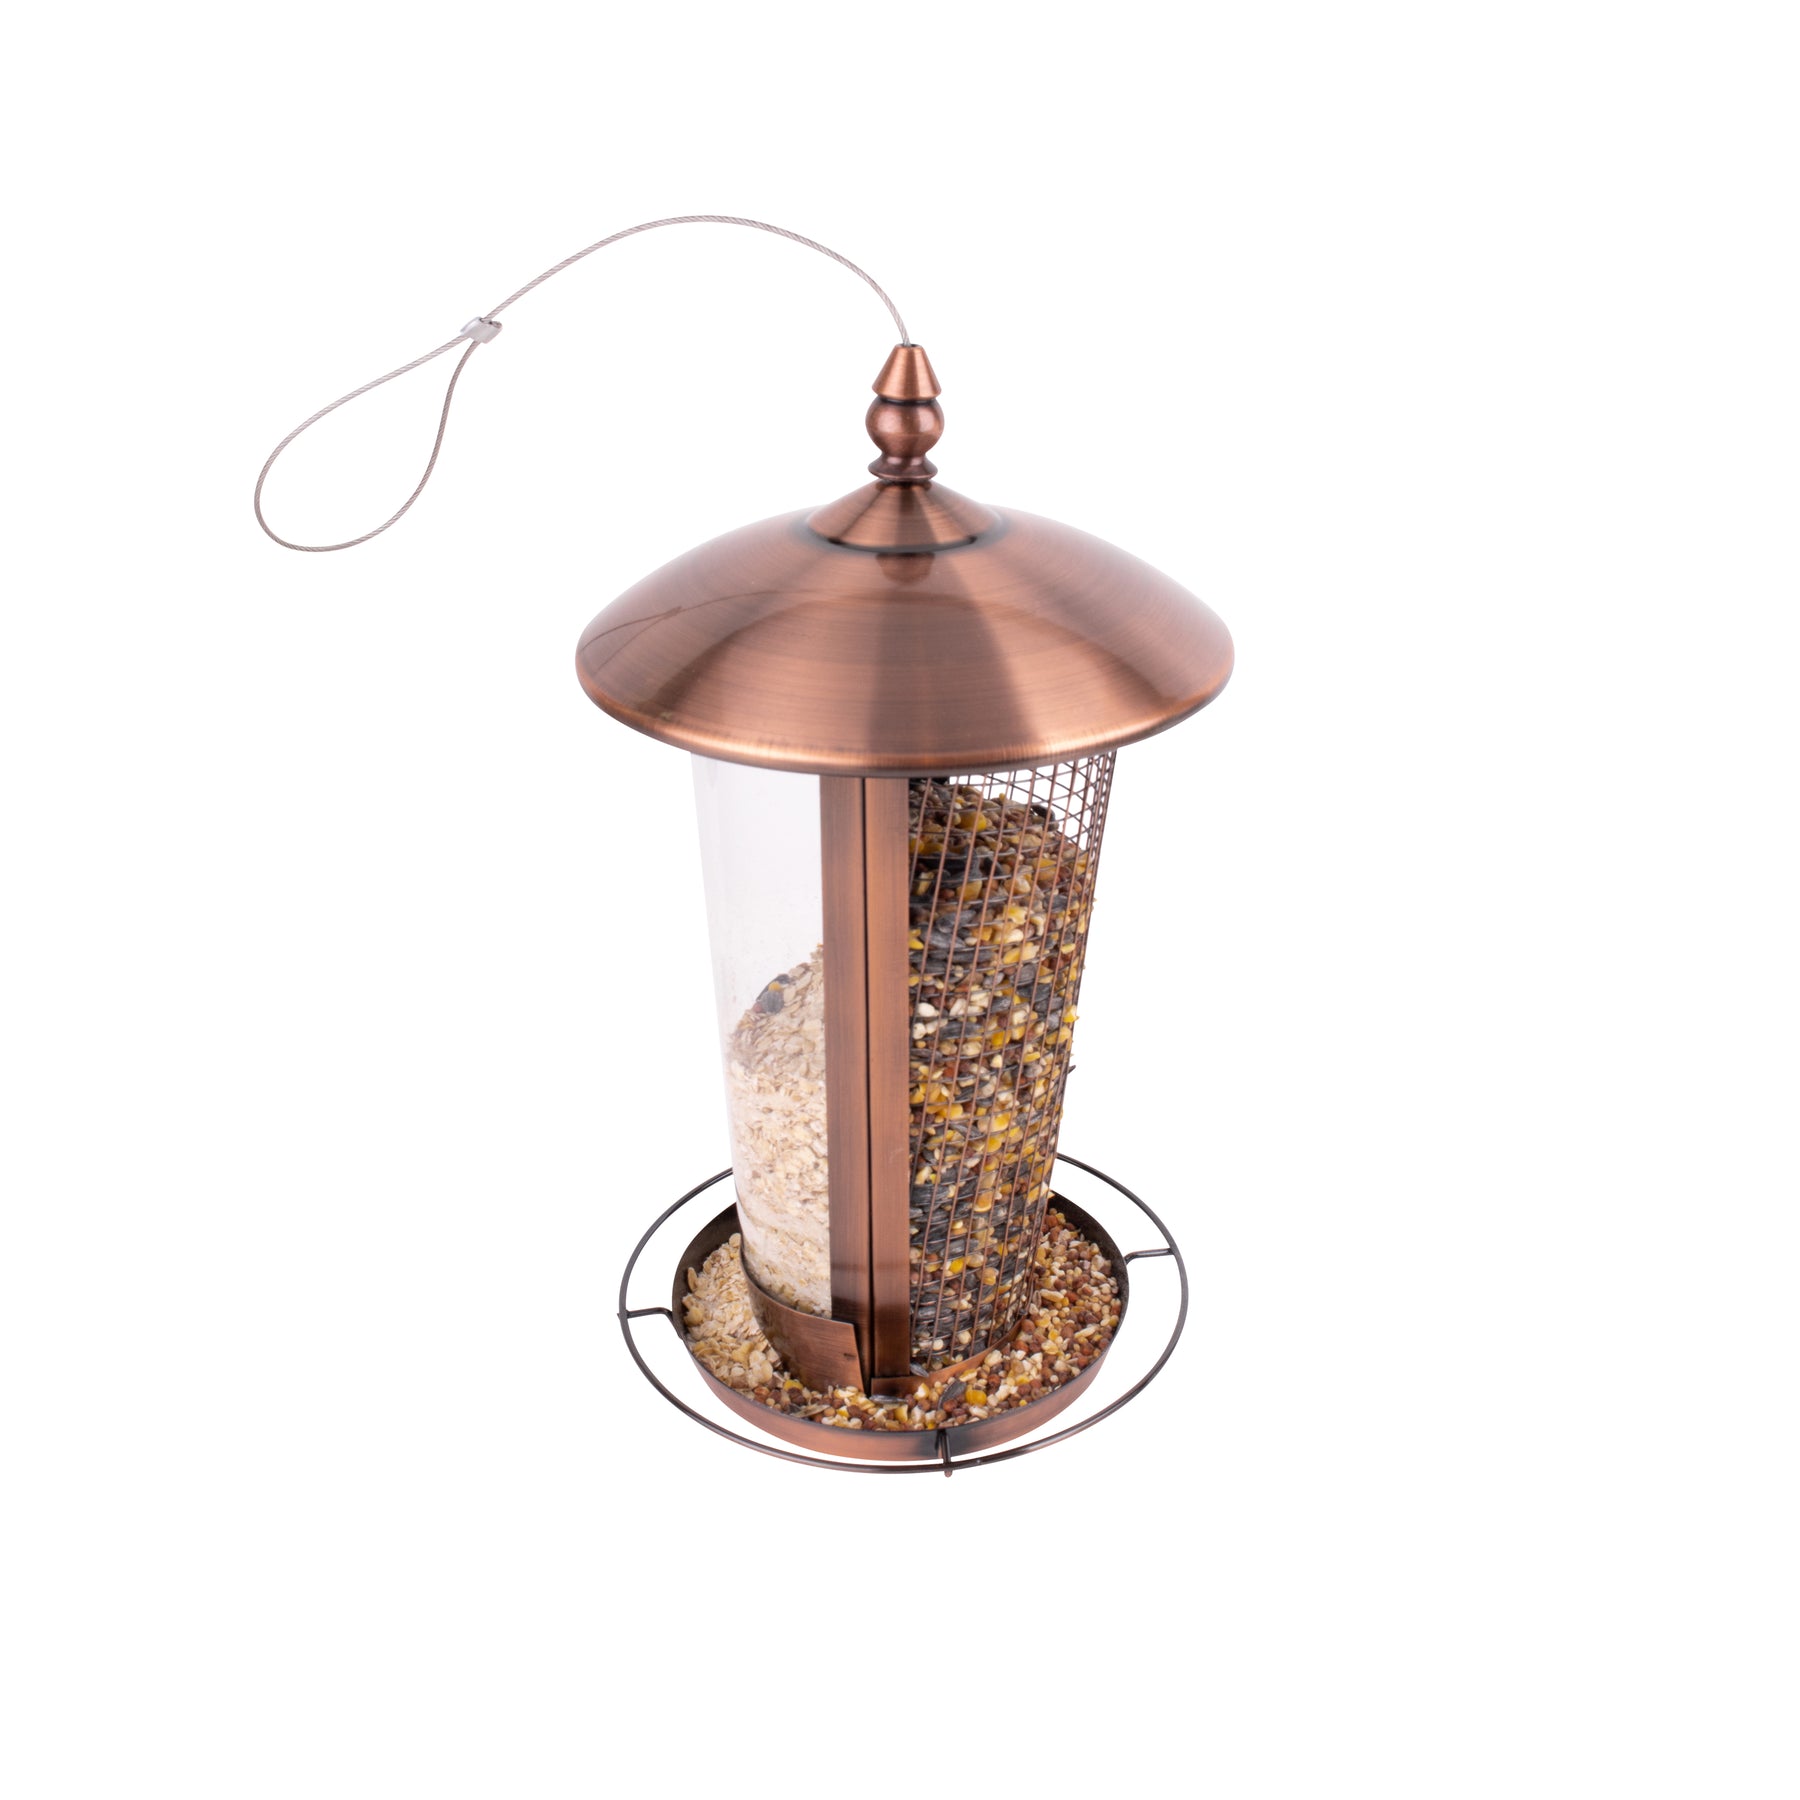 Top-angled view of the Bliss Outdoors 2-in-1 Hanging Bird Feeder filled with bird seed.